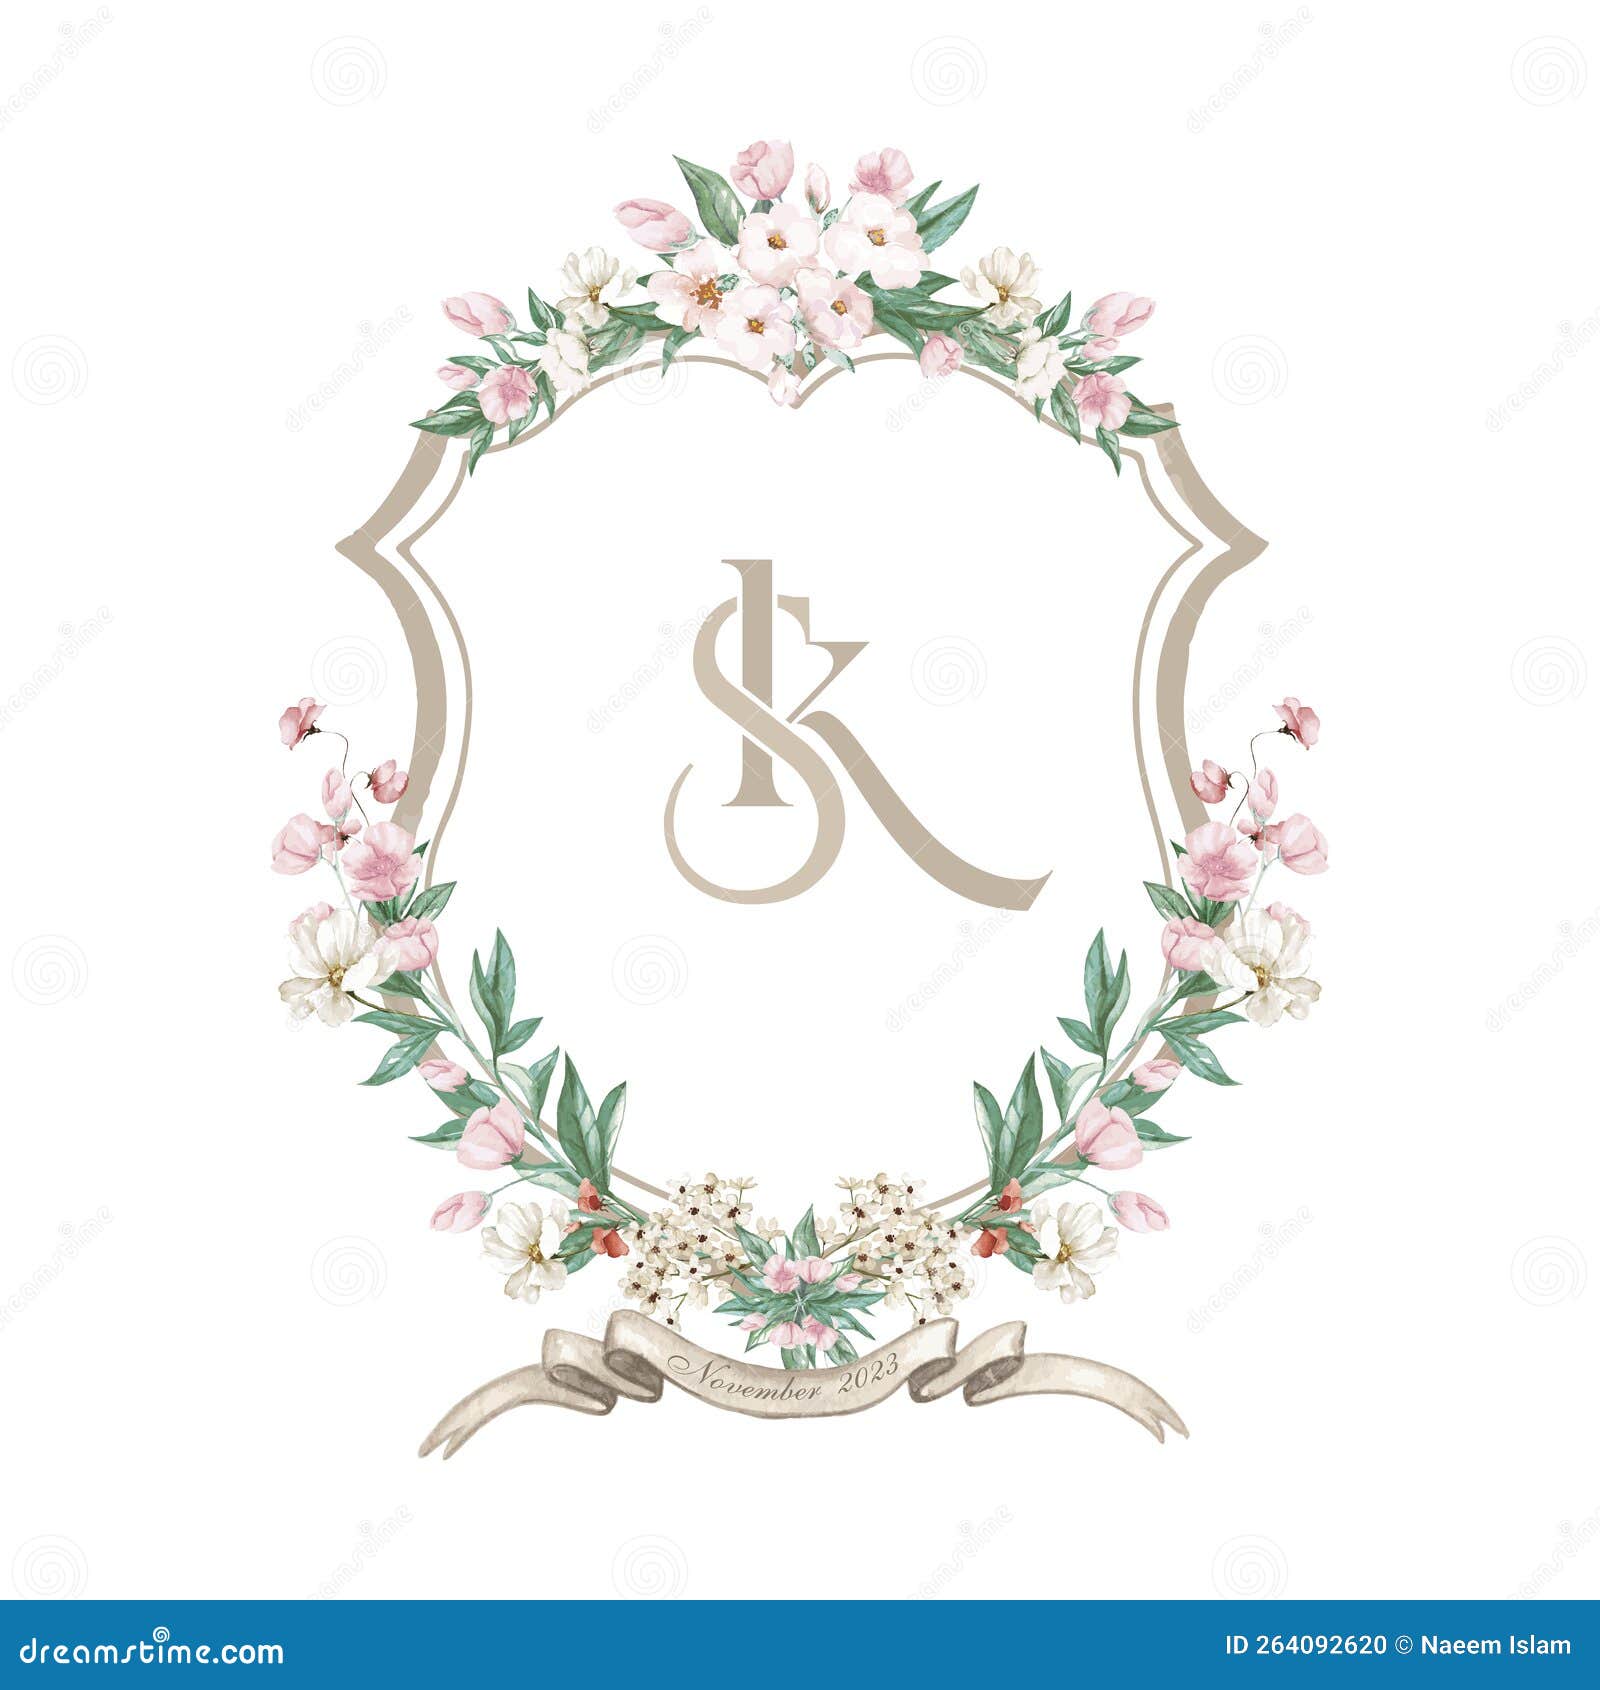 painted wedding monogram sk initial watercolor floral crest. watercolor crest frame.